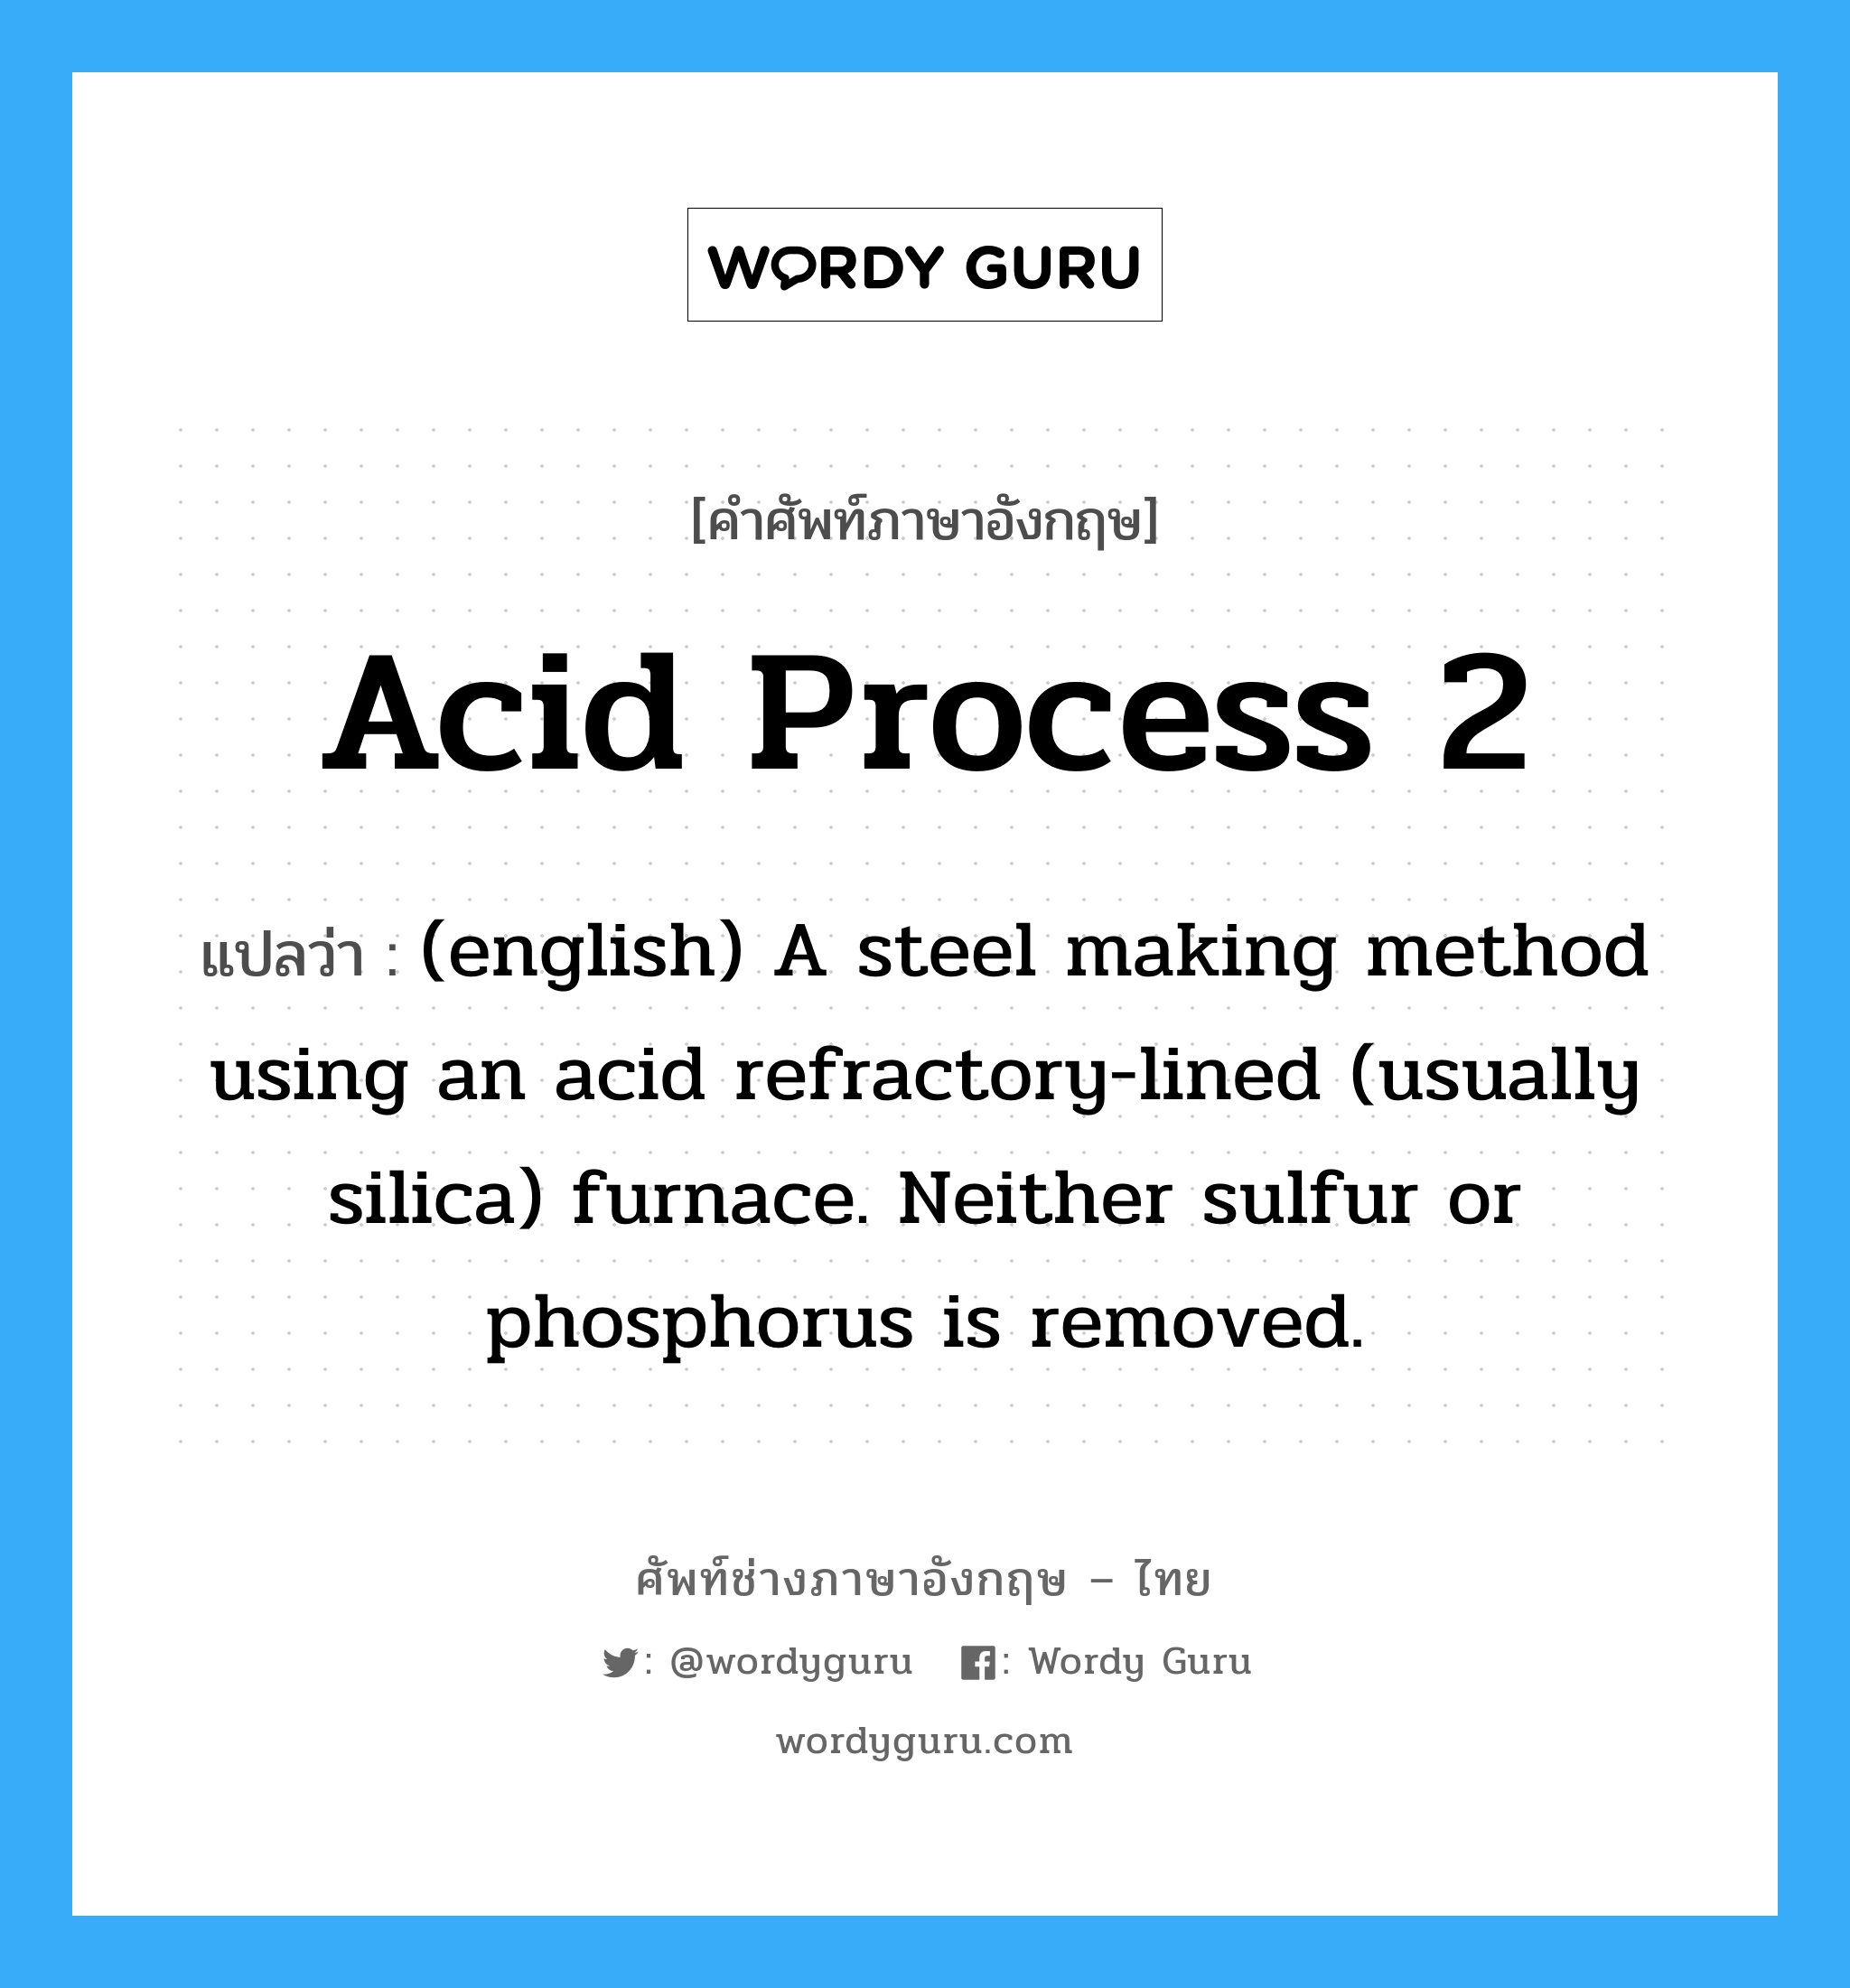 (english) A steel making method using an acid refractory-lined (usually silica) furnace. Neither sulfur or phosphorus is removed. ภาษาอังกฤษ?, คำศัพท์ช่างภาษาอังกฤษ - ไทย (english) A steel making method using an acid refractory-lined (usually silica) furnace. Neither sulfur or phosphorus is removed. คำศัพท์ภาษาอังกฤษ (english) A steel making method using an acid refractory-lined (usually silica) furnace. Neither sulfur or phosphorus is removed. แปลว่า Acid Process 2